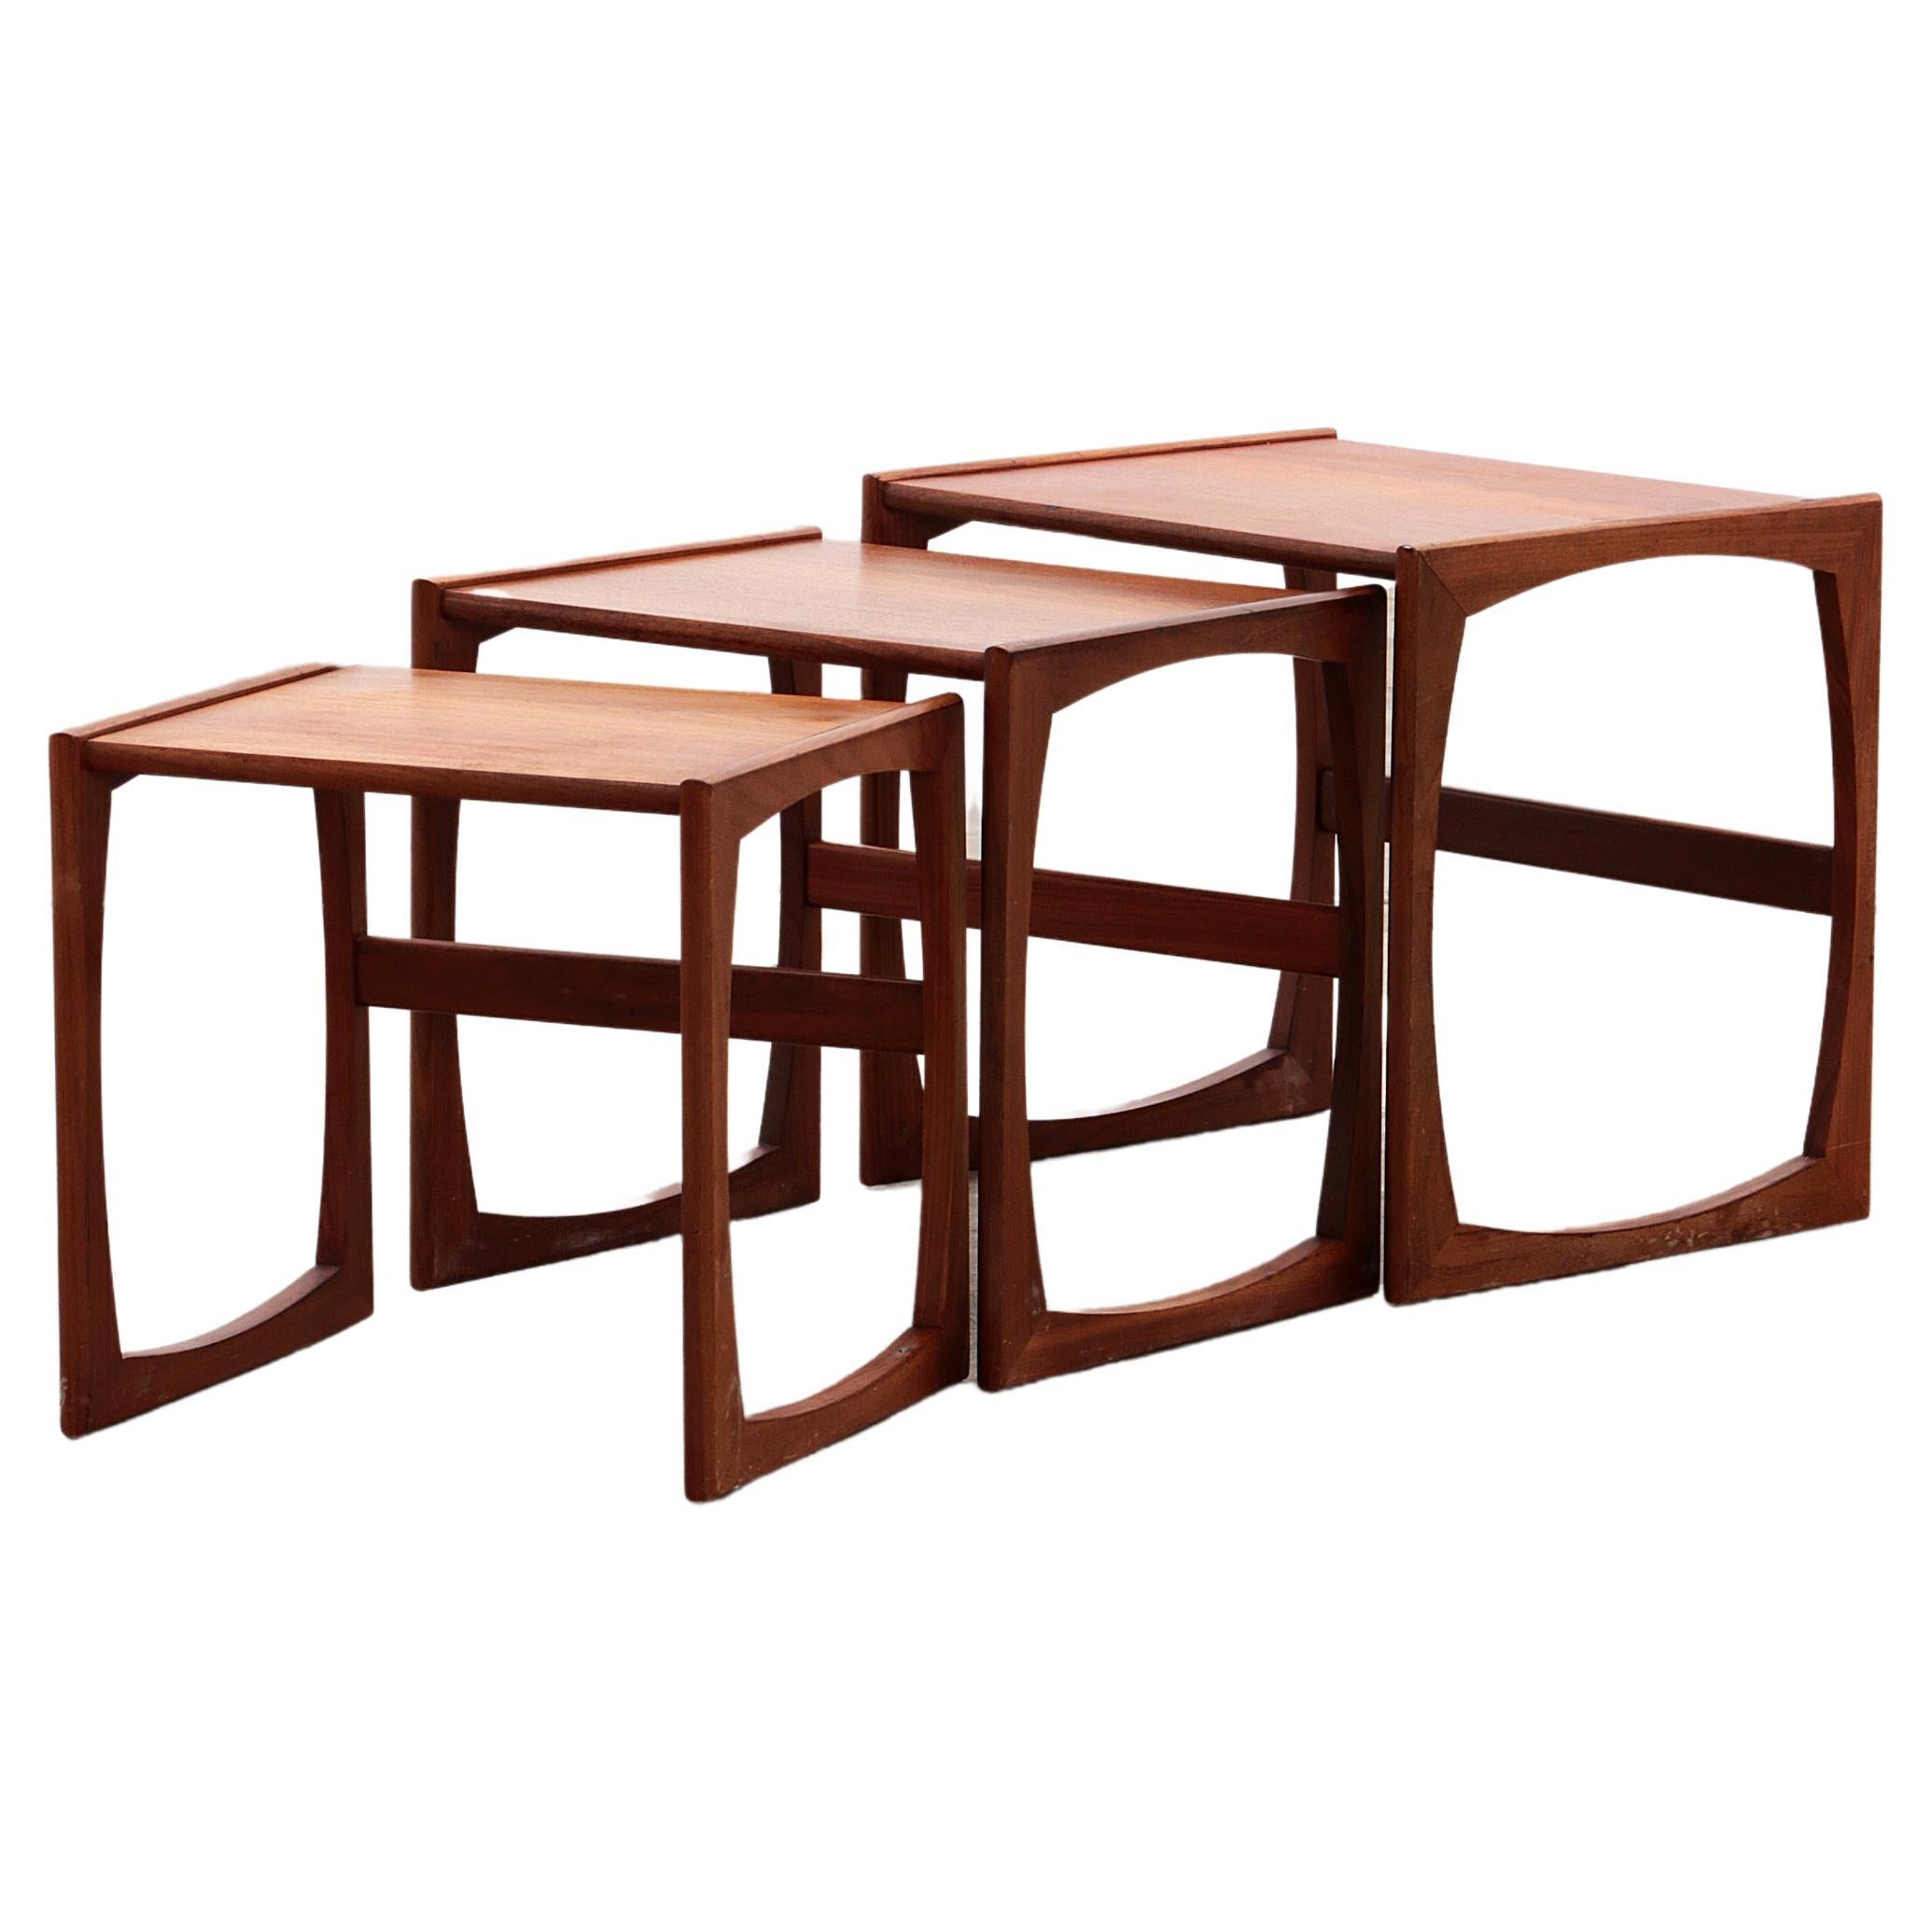 Side tables G-Plan Vintage Nesting Tables, 1960s England.